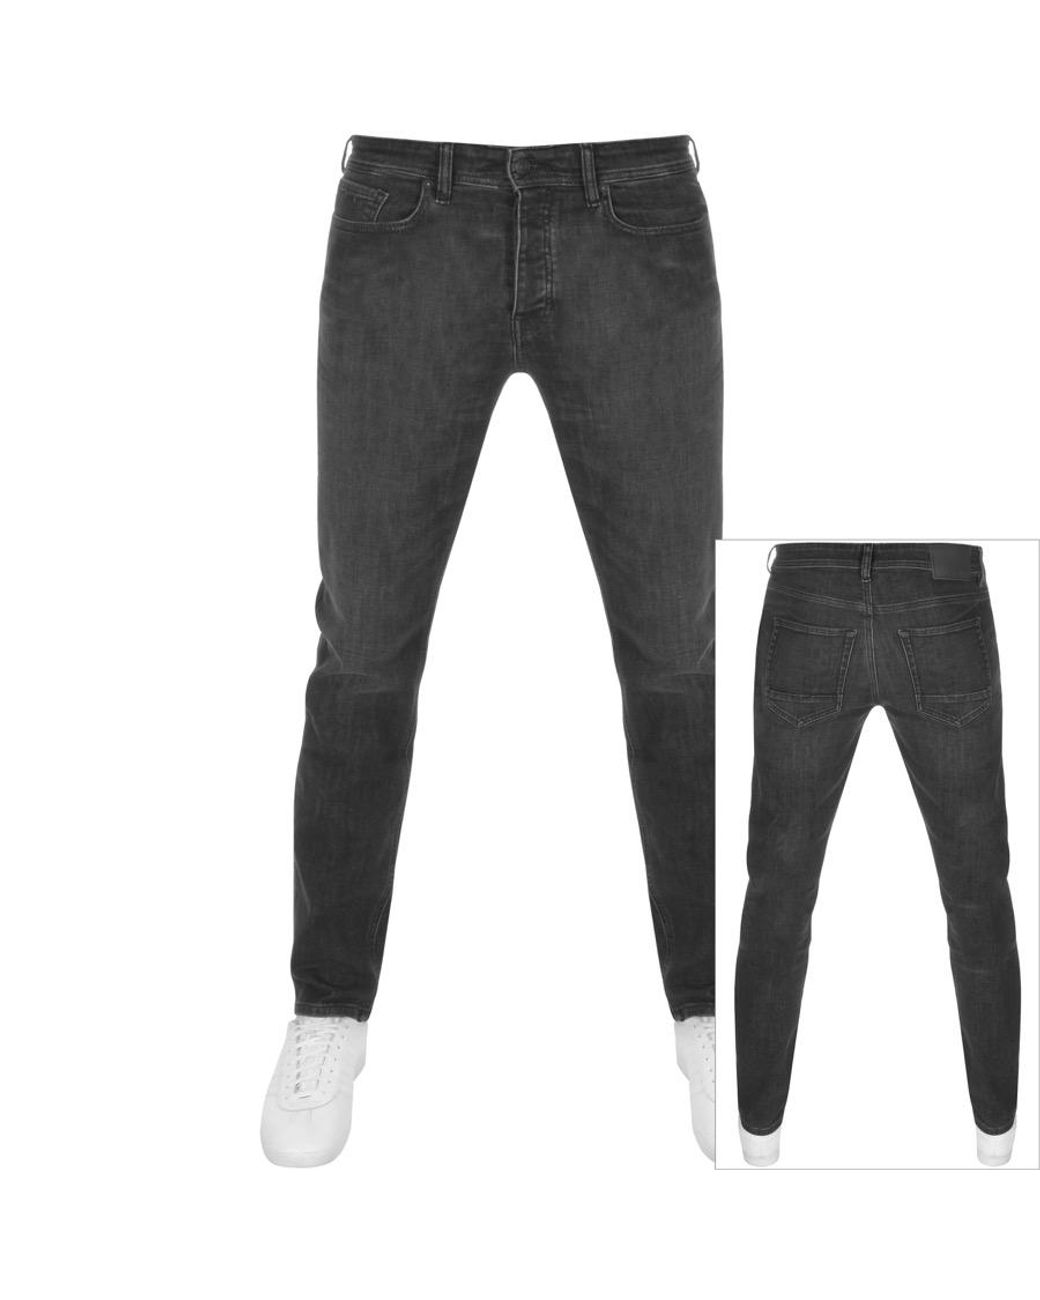 Mens Clothing Jeans Tapered jeans BOSS by HUGO BOSS Denim Taber Tapered Fit Jeans in Black for Men 